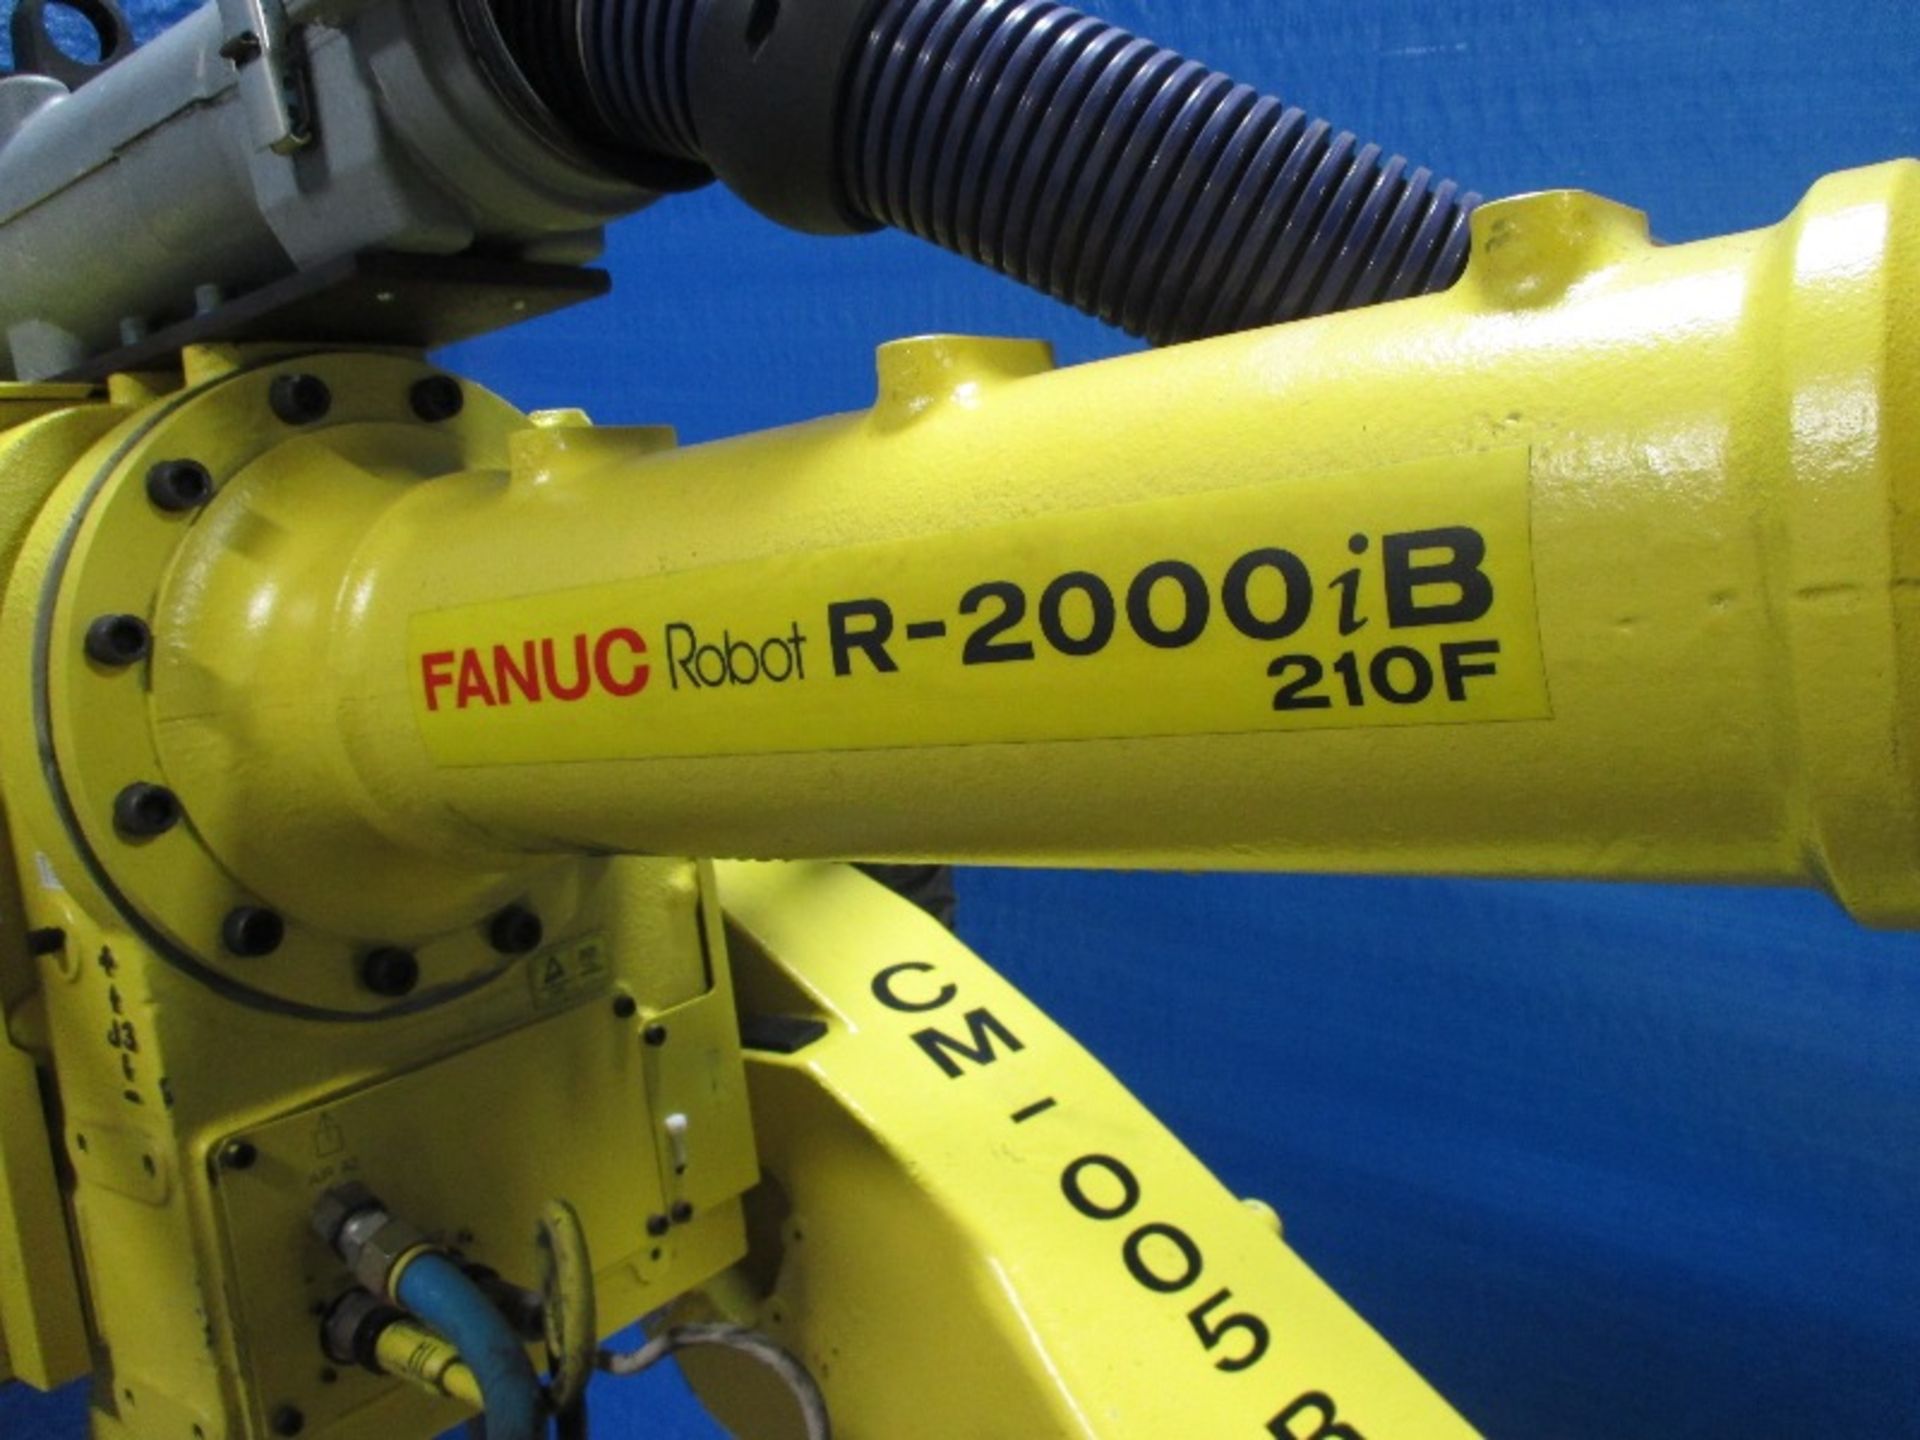 FANUC ROBOT R-2000iB/210F R-30iA CONTROL WITH CABLES AND TEACH PENDANT, SN 93661, YEAR 2008 - Image 2 of 6